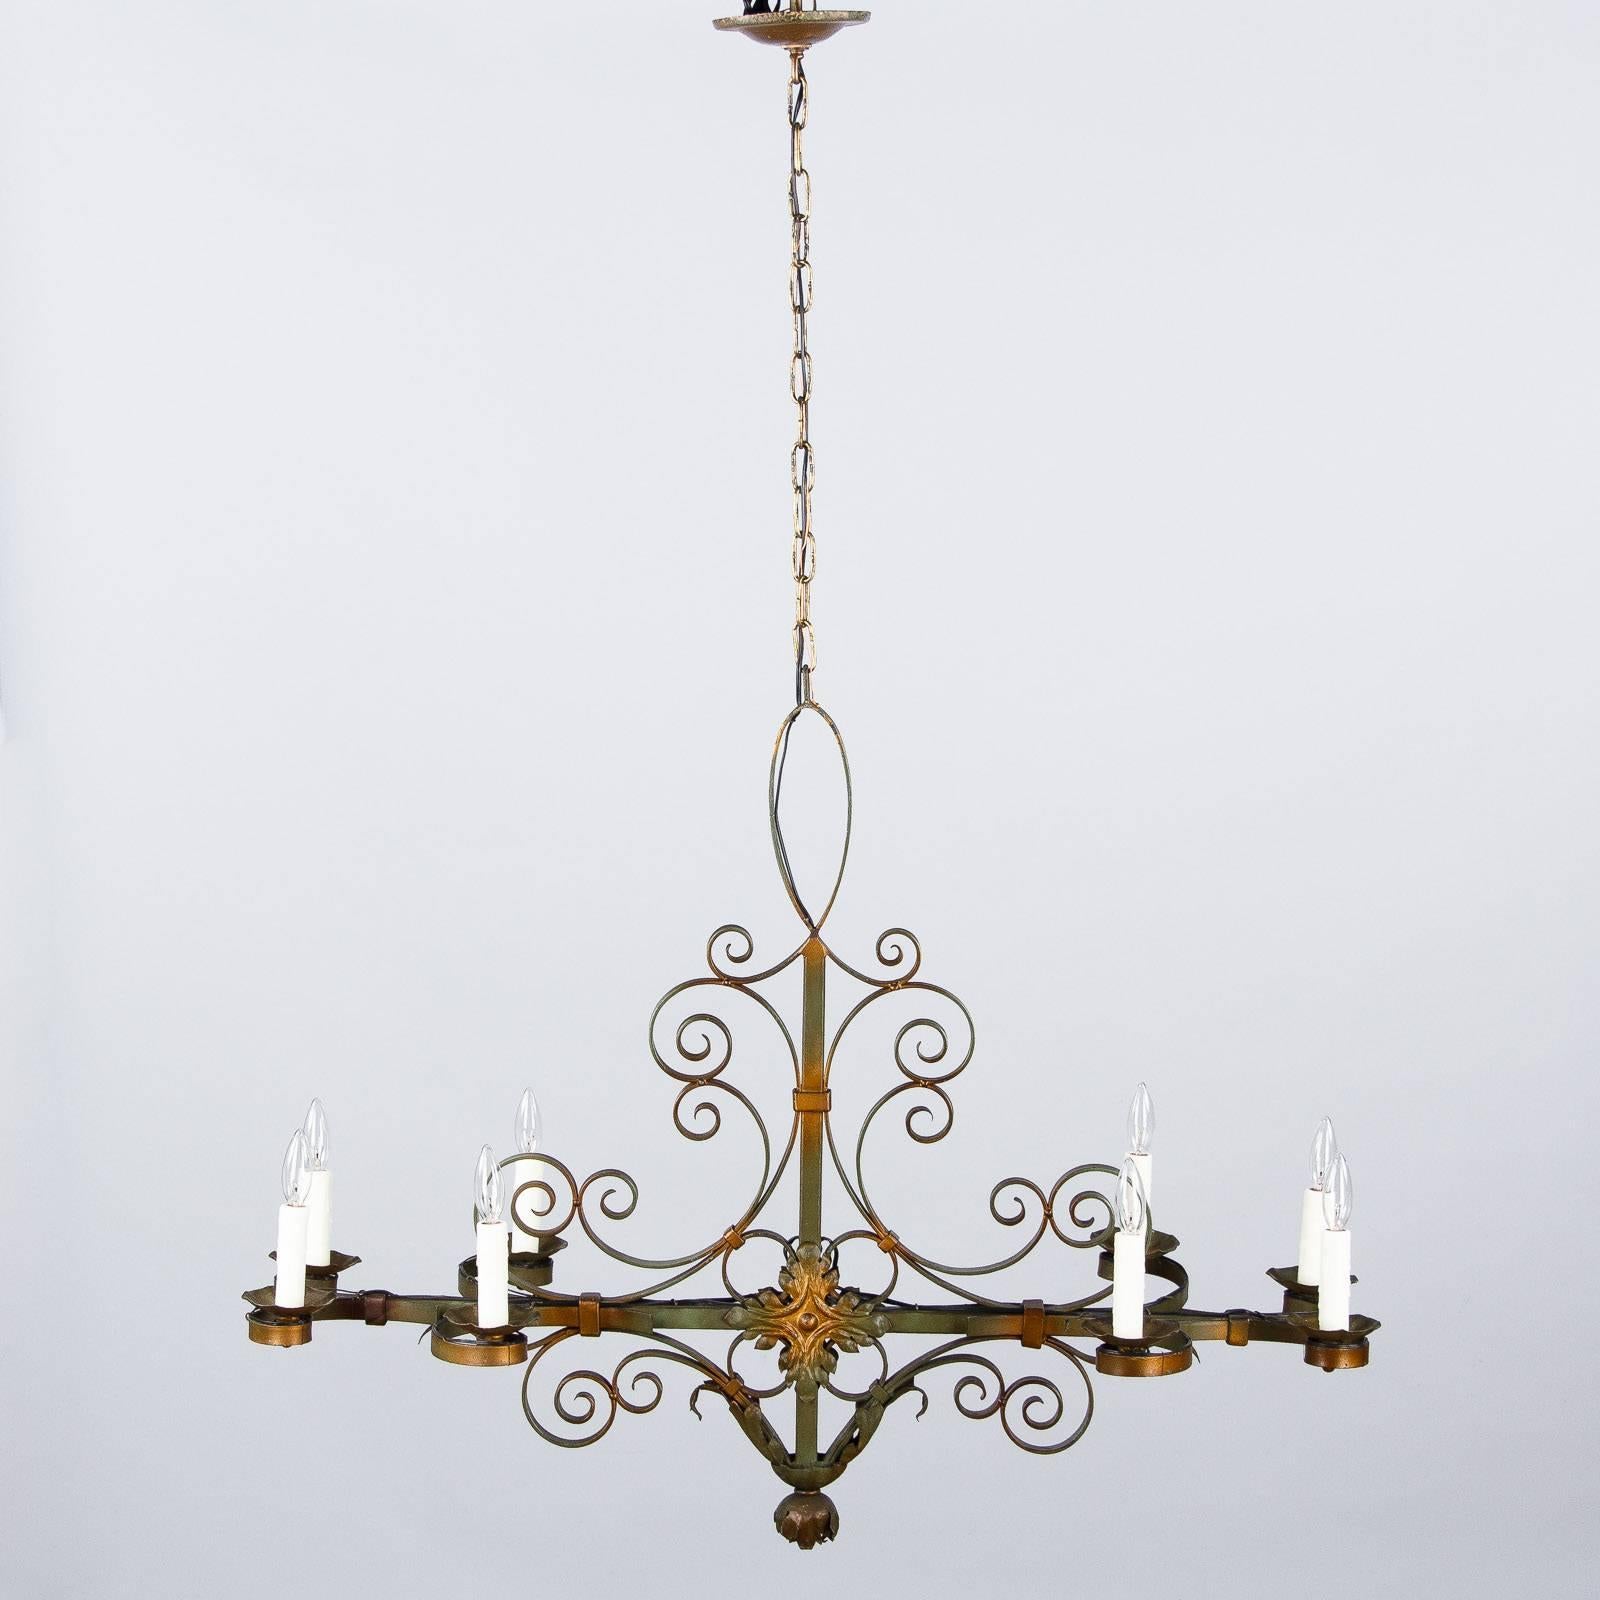 This eight-light French forged iron chandelier has a beautiful green and bronze patina and scroll motifs. The adjustable chain and canopy add 24" to the fixture.